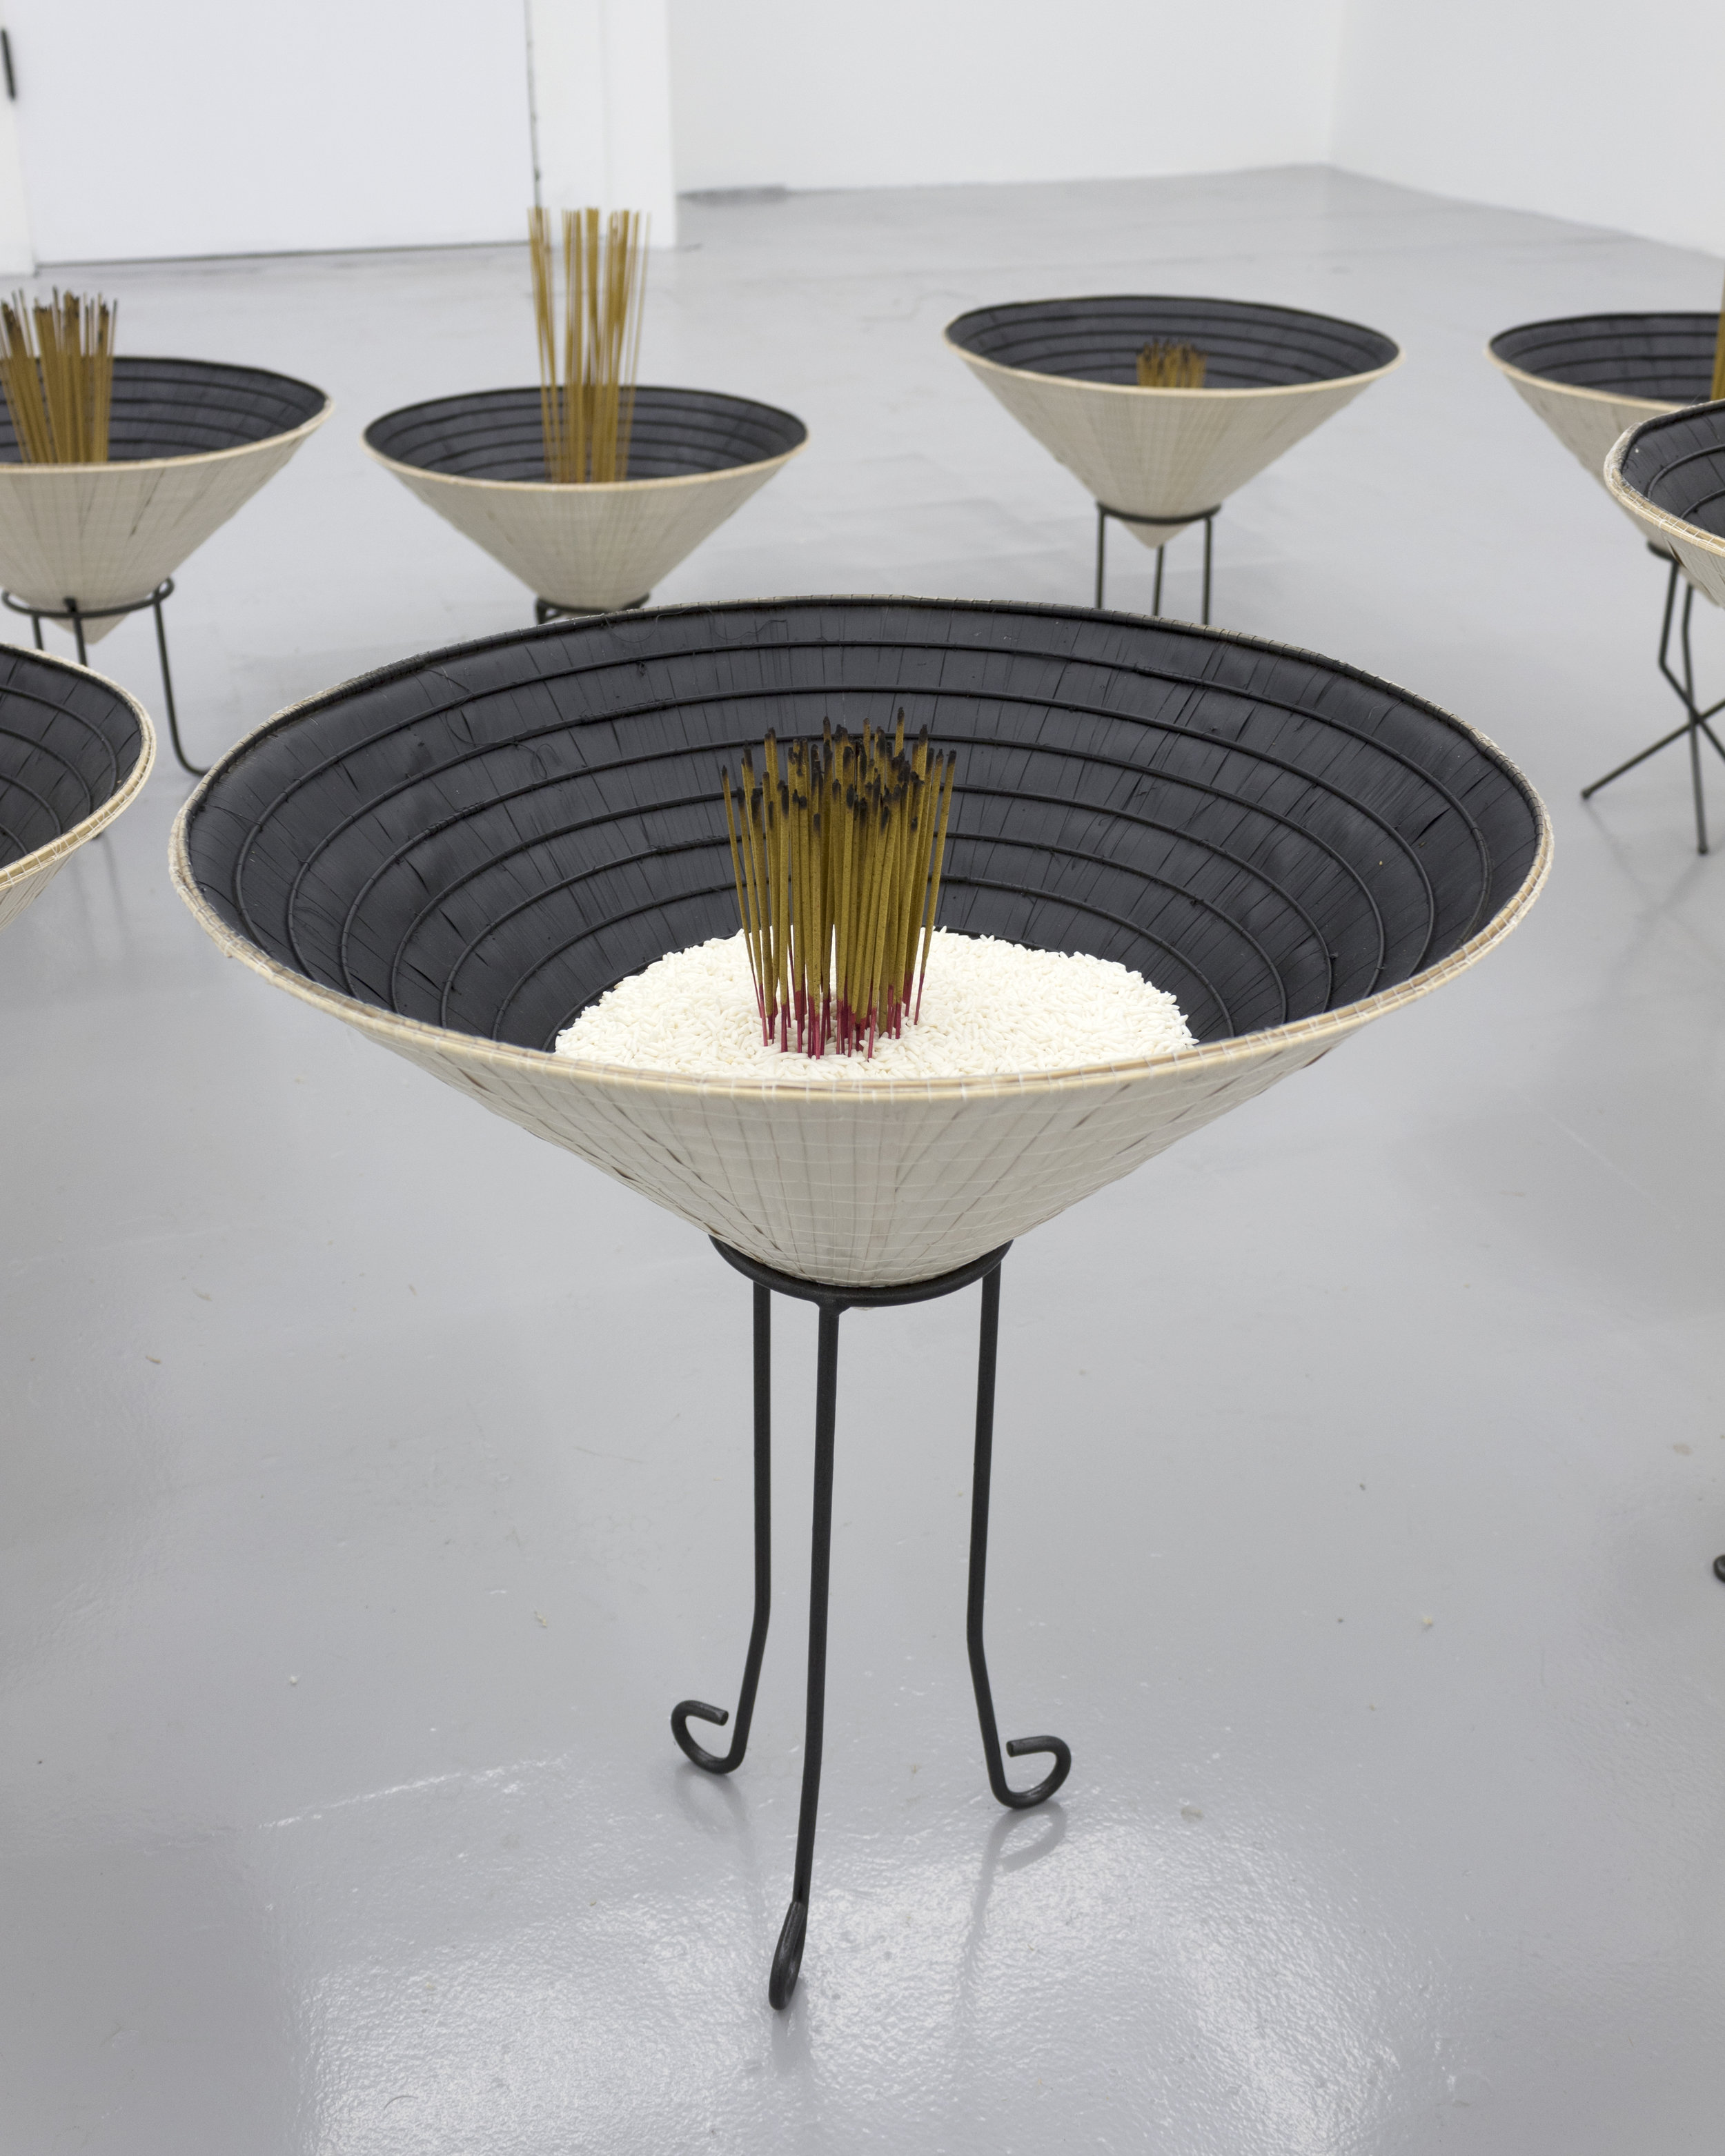  Millian Giang Lien Pham,  Reforge: 9 Phases (Five),  2019. Conical hat, sweet rice, incense, metal stand 